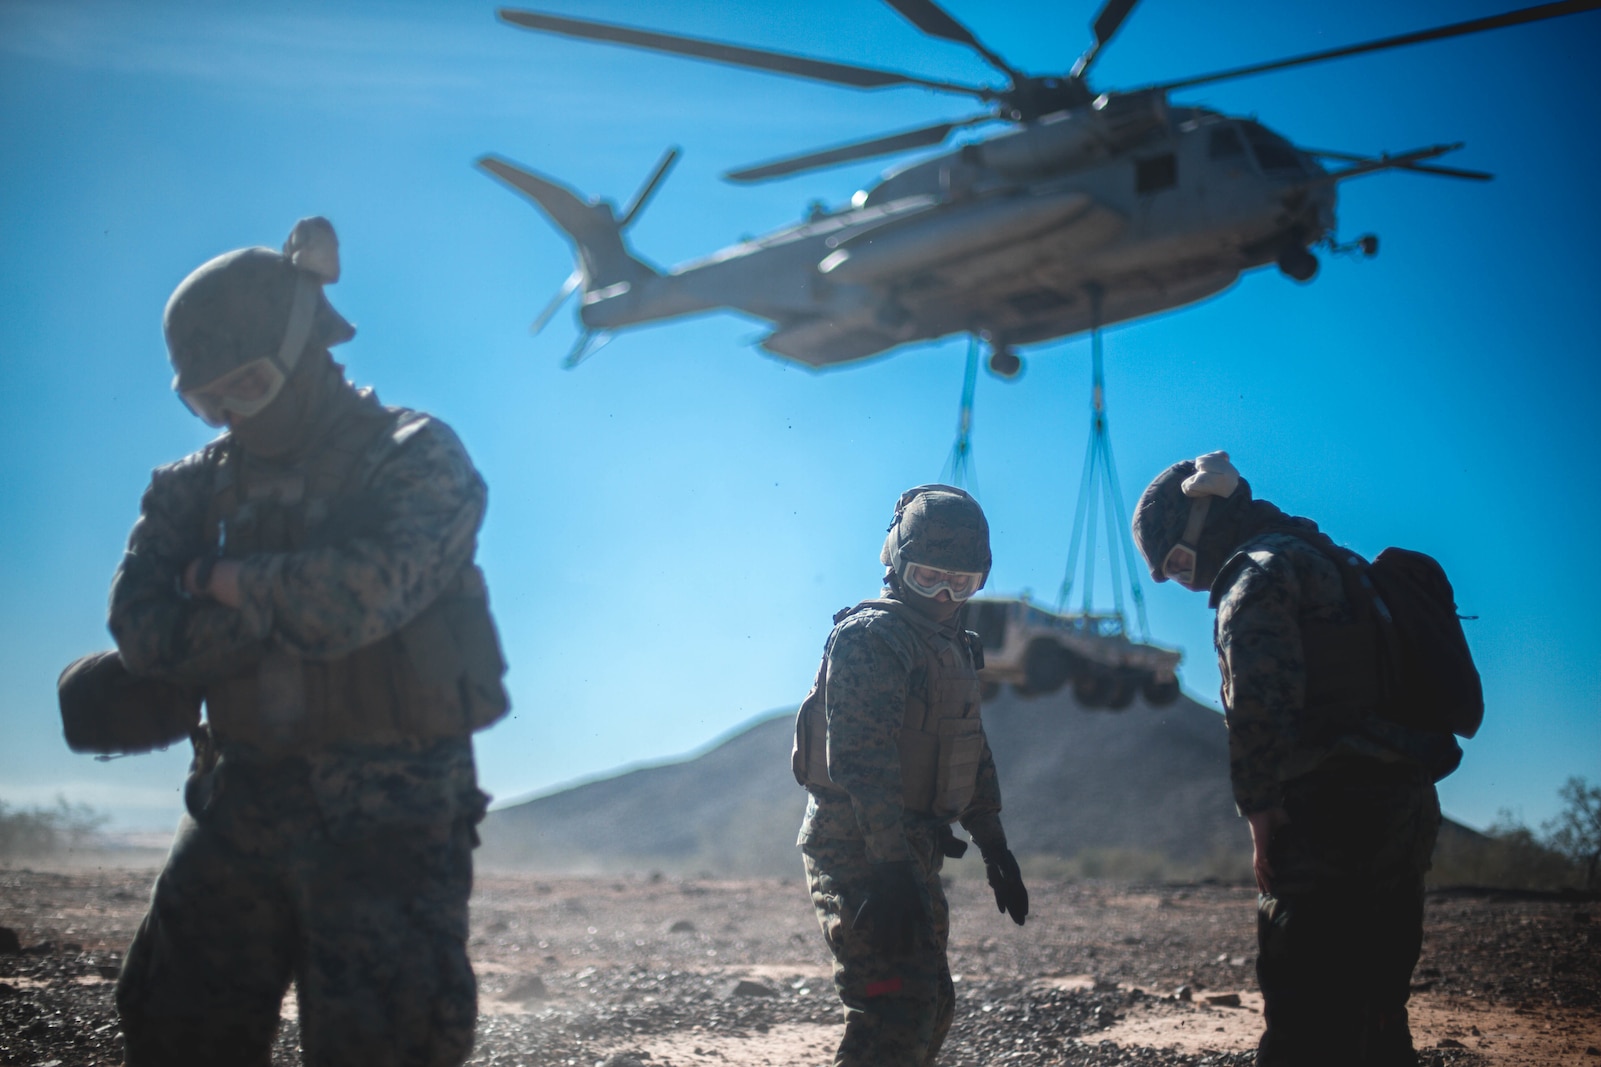 U.S. Marines with 1st Transportation Support Battalion, 1st Marine Logistics Group, ground themselves after a CH-53E Super Stallion from Marine Heavy Helicopter Squadron 465, 3rd Marine Aircraft Wing, lifts a Humvee during a helicopter support team training exercise in Yuma, Ariz., on Jan. 23, 2019.